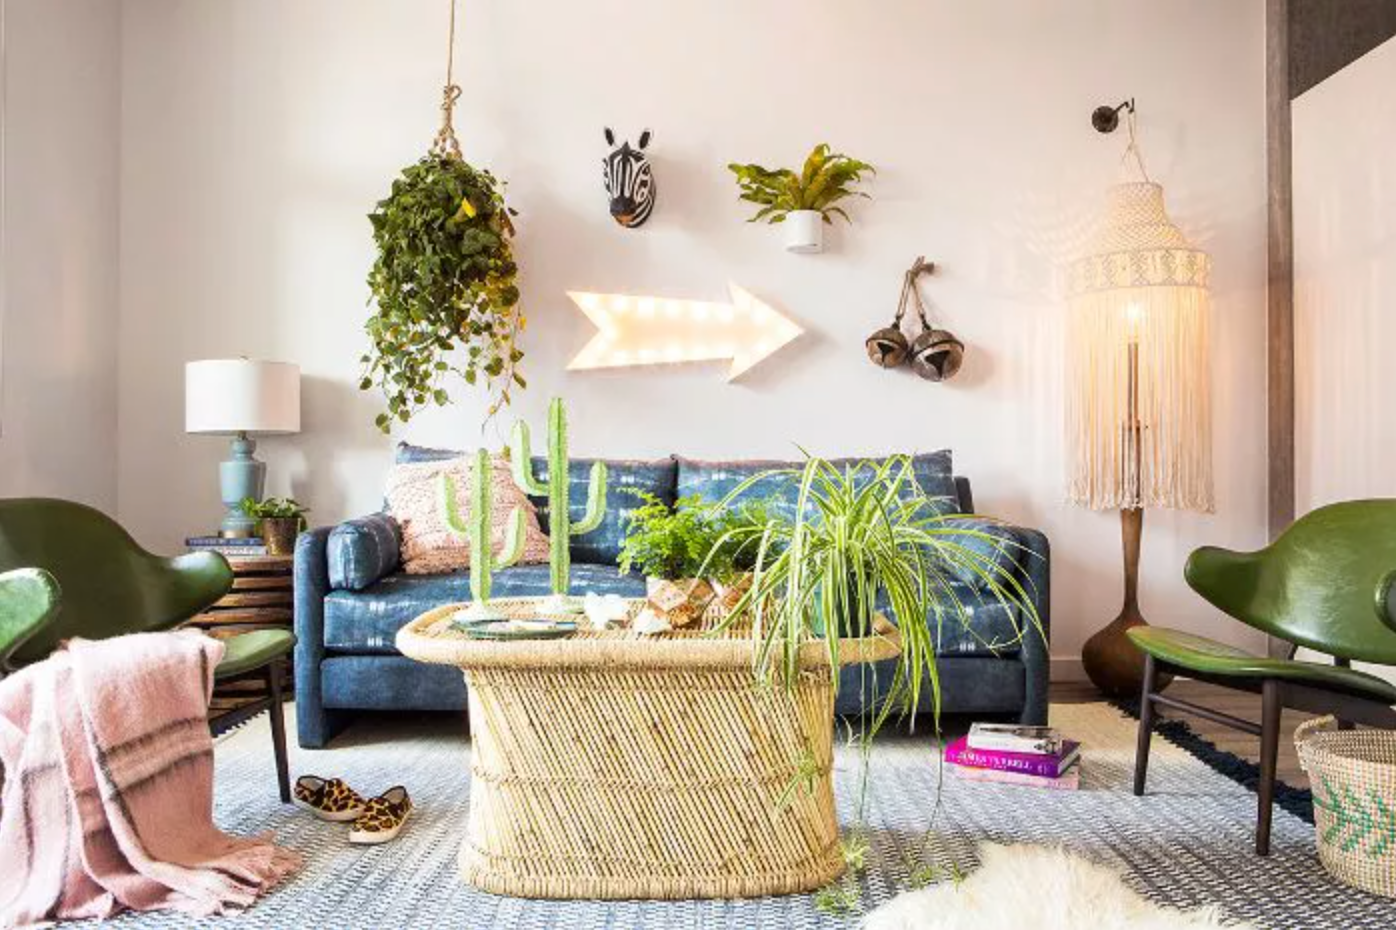 The freedom of mixed furniture and indoor plants decor of Boho style